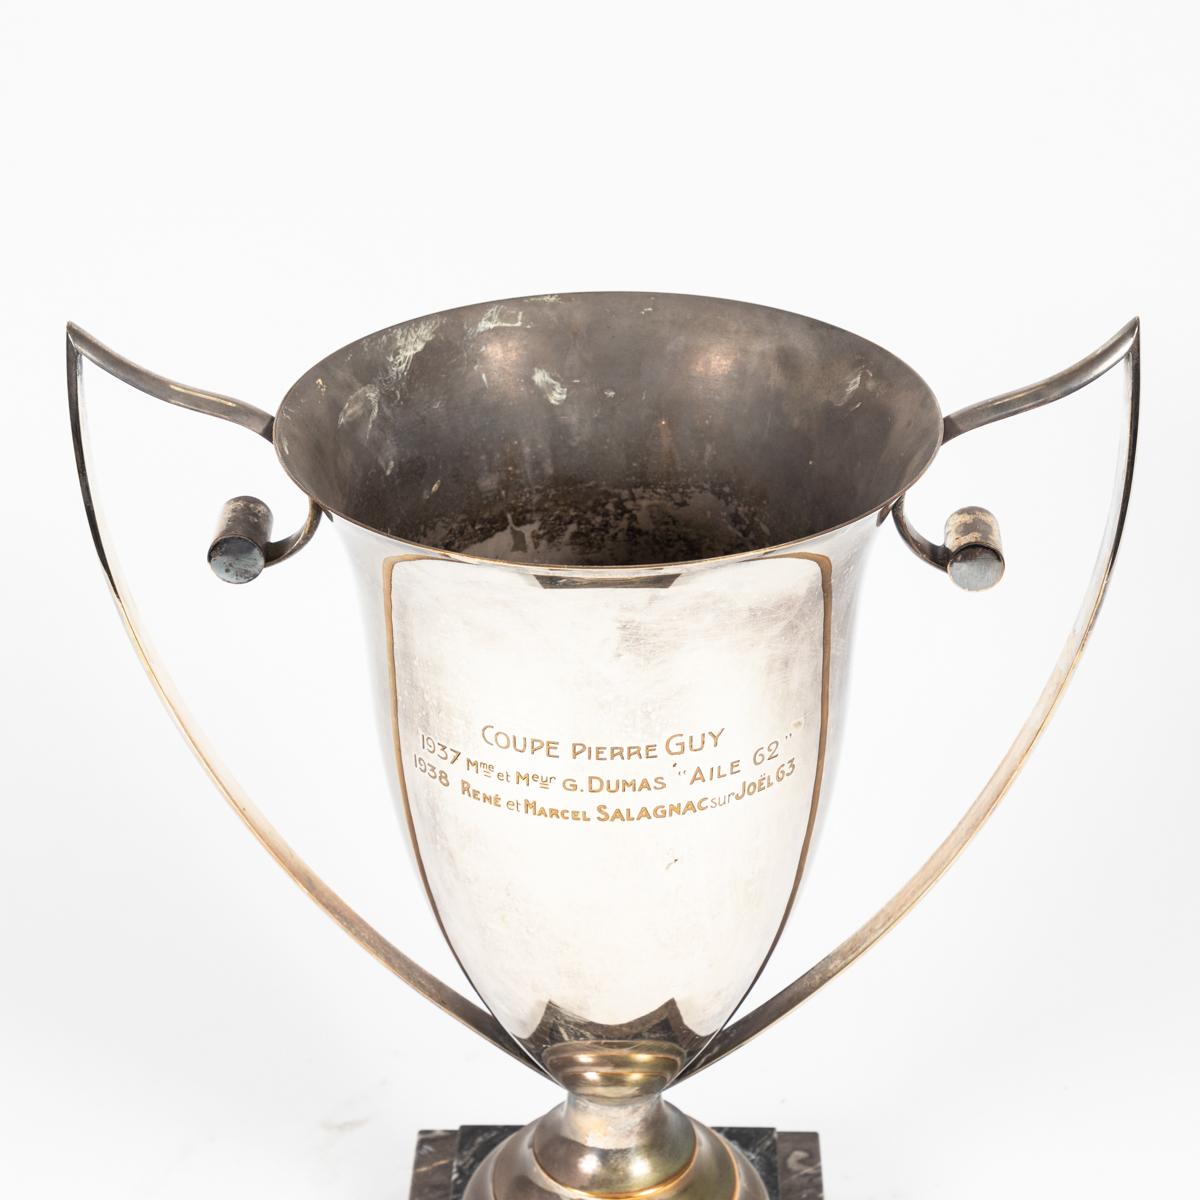 French modernist silver-plate trophy mounted on a stepped taupe and black marble base, featuring winged scroll-tipped handles. The piece was originally awarded to winners of the 